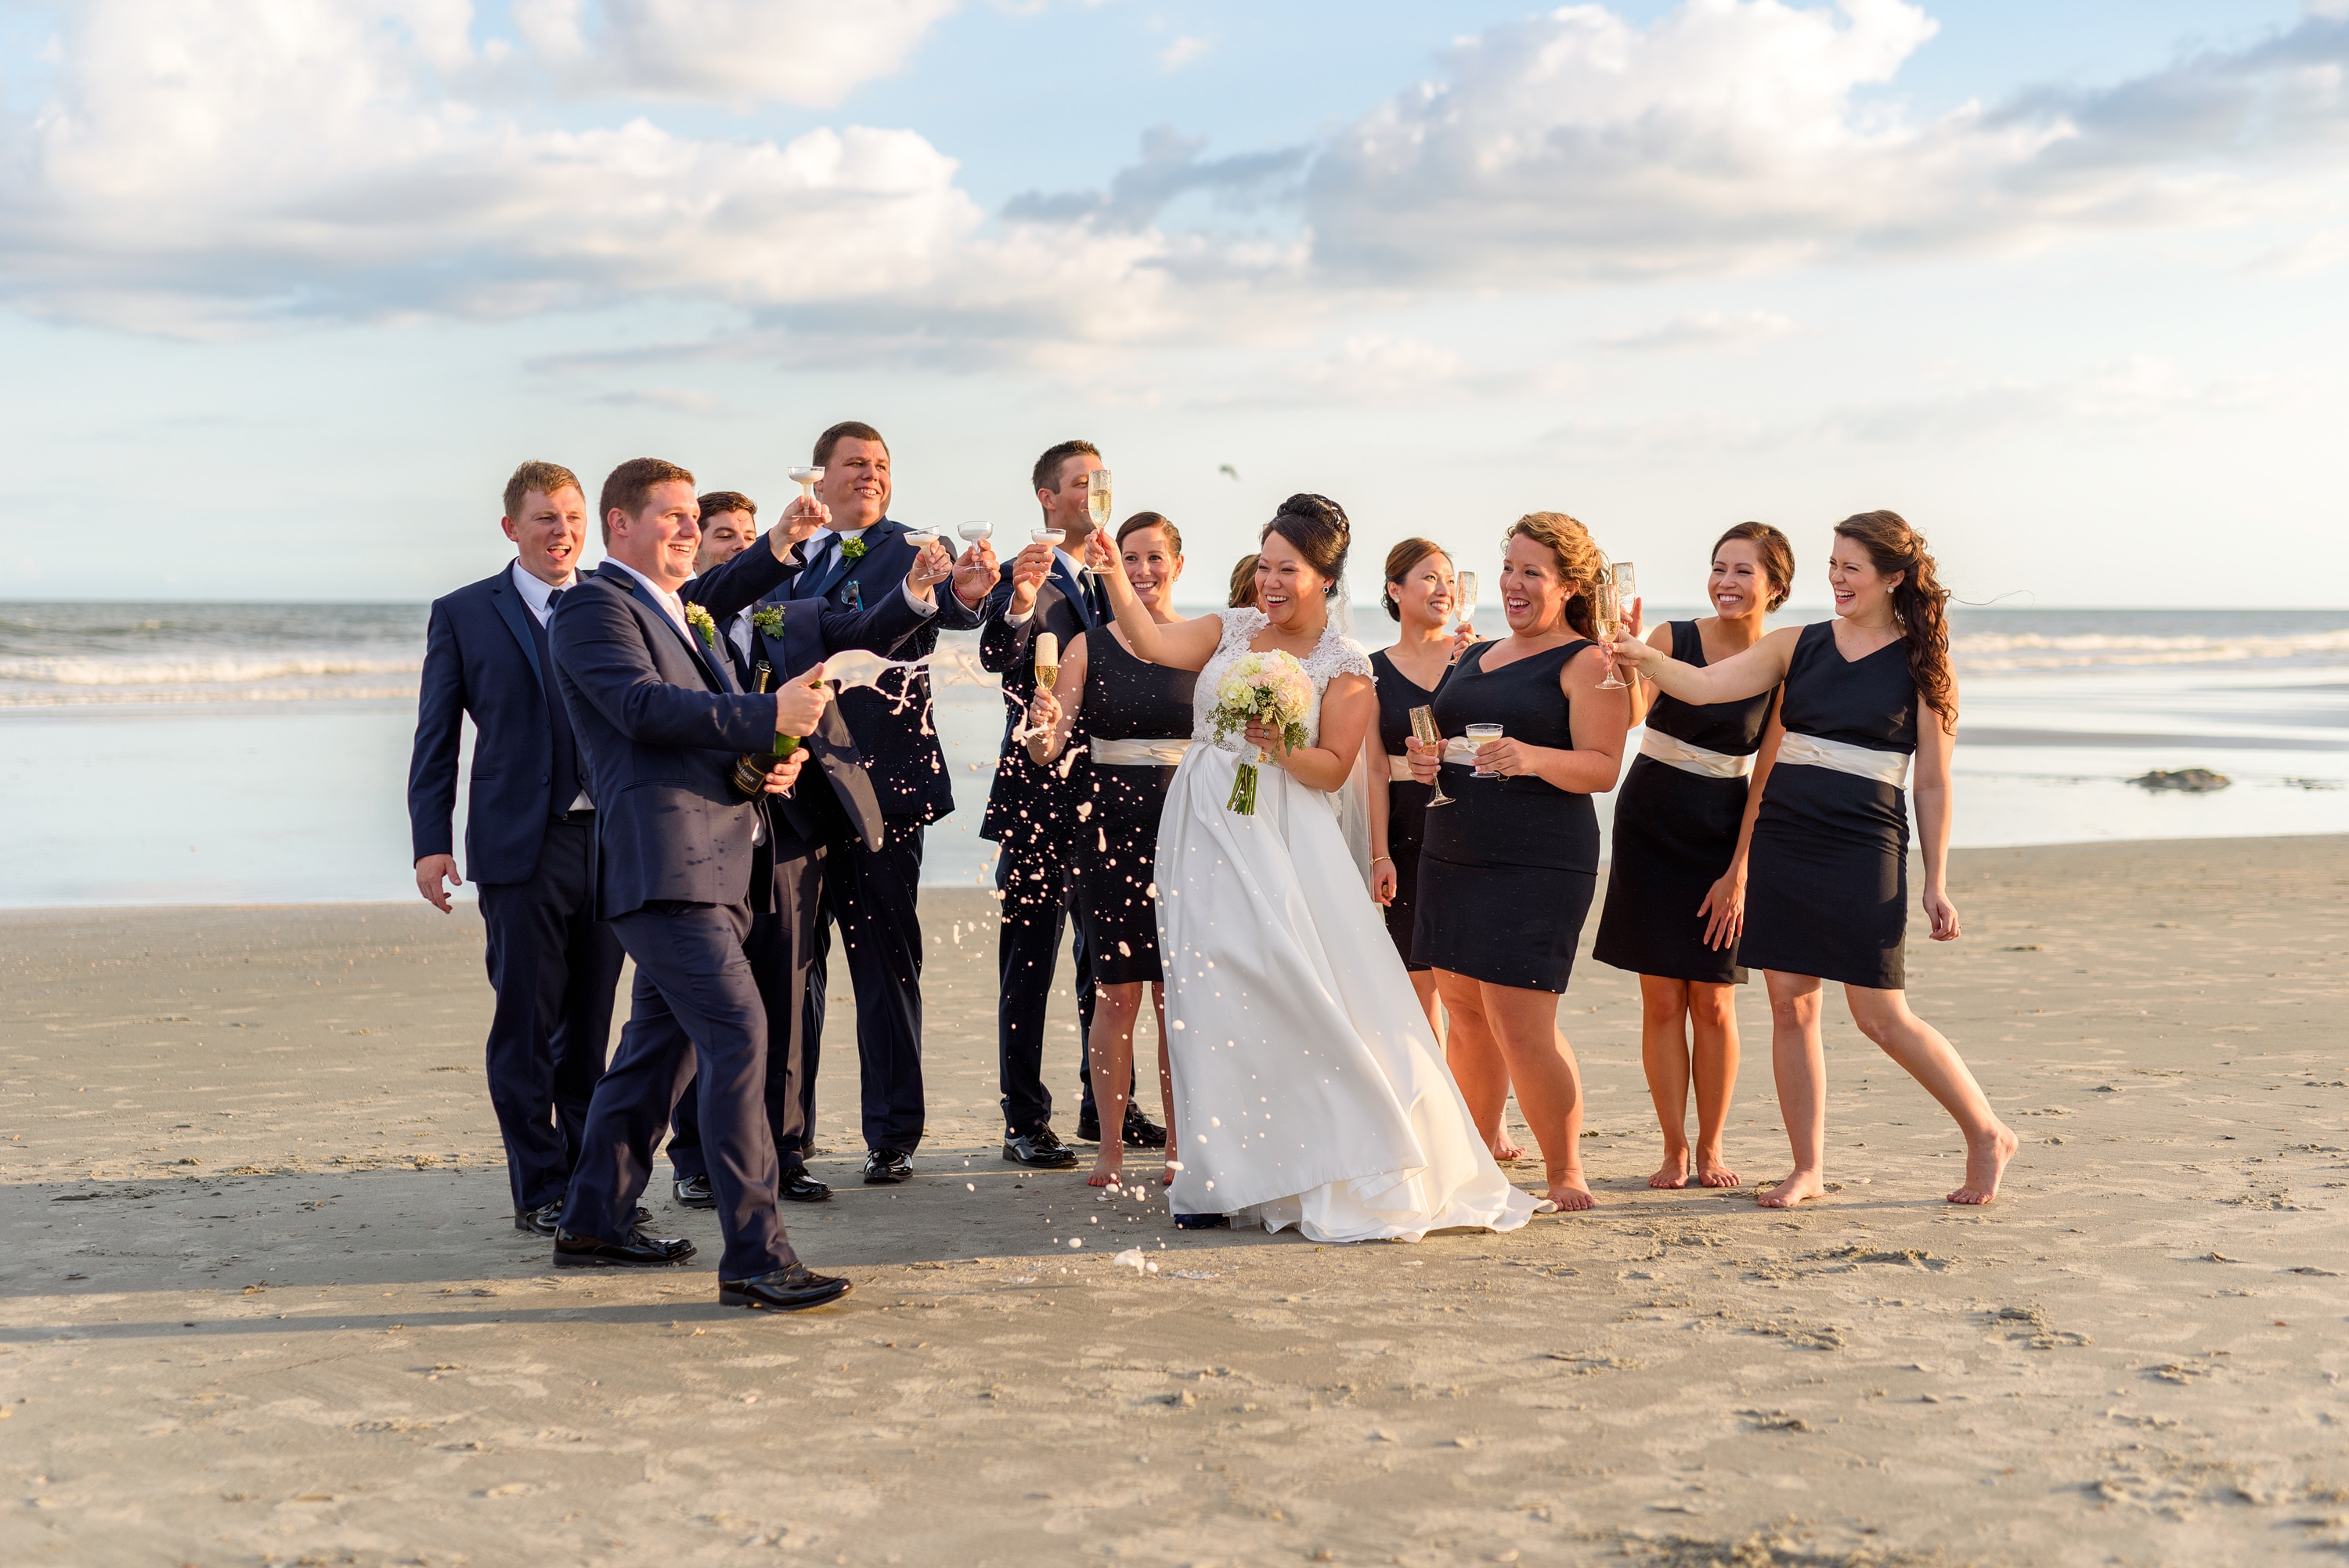 Bridal party opening a champagne bottle together on the beach